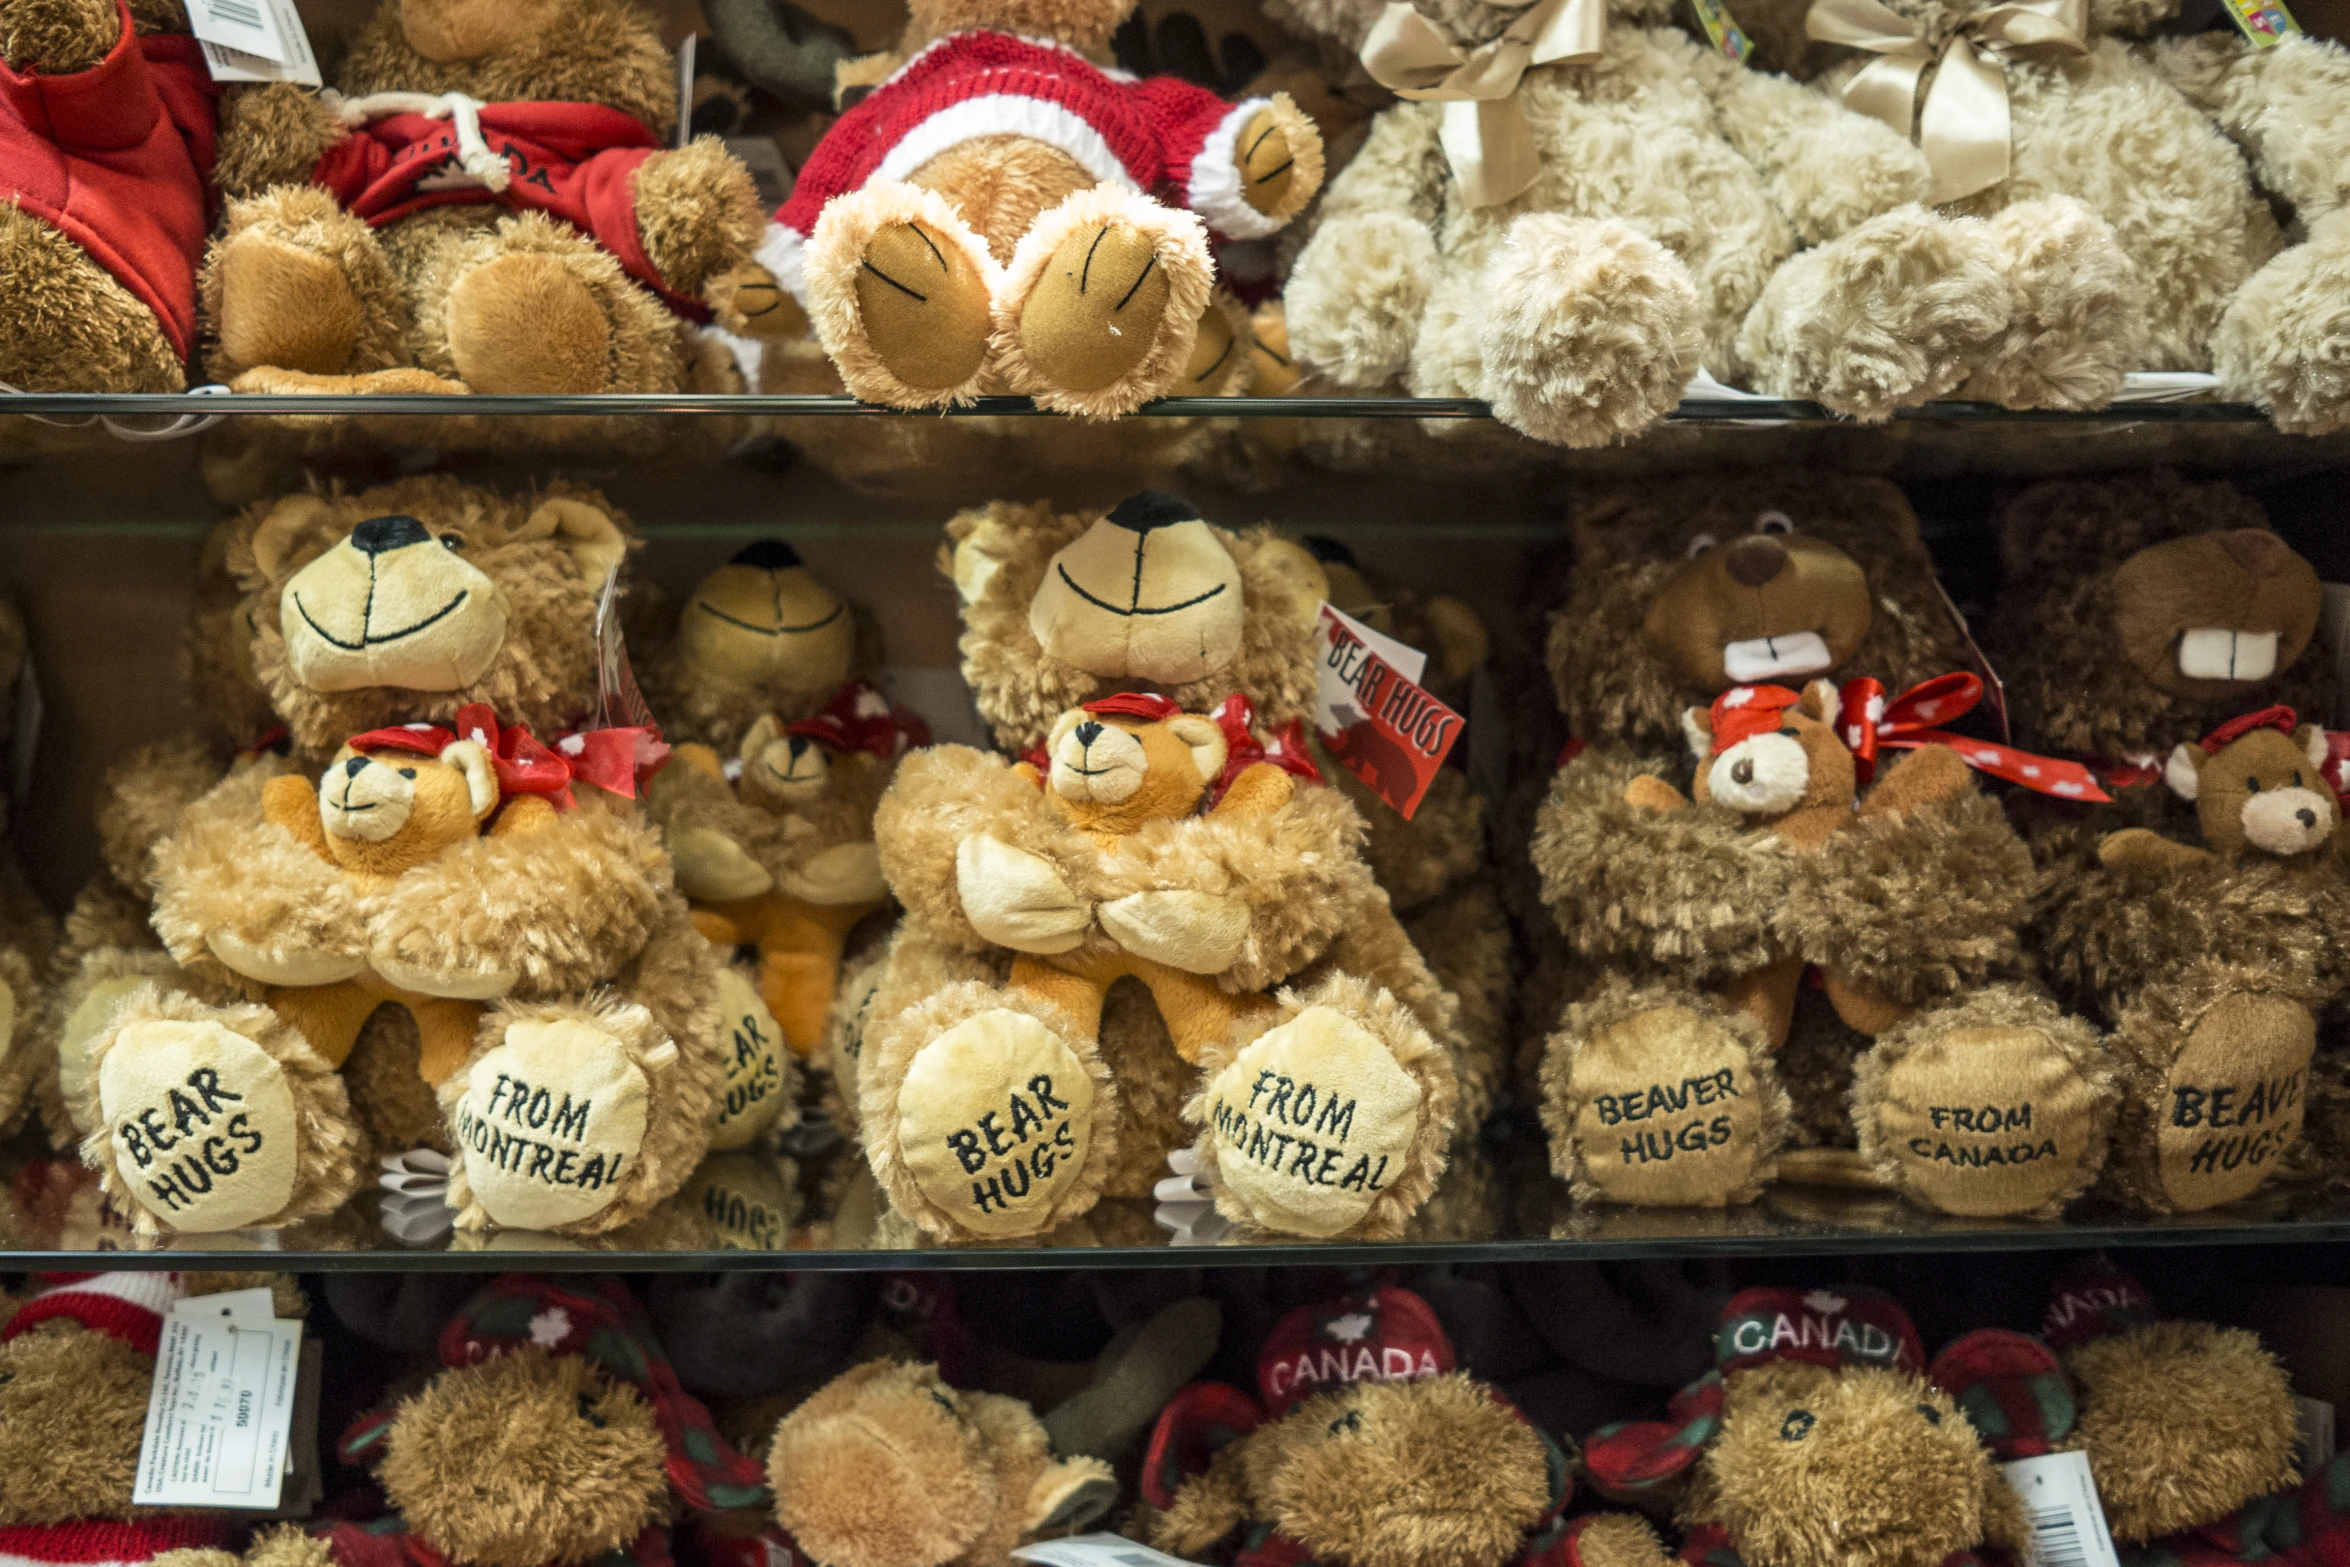 many brown teddy bears and other stuffed animals